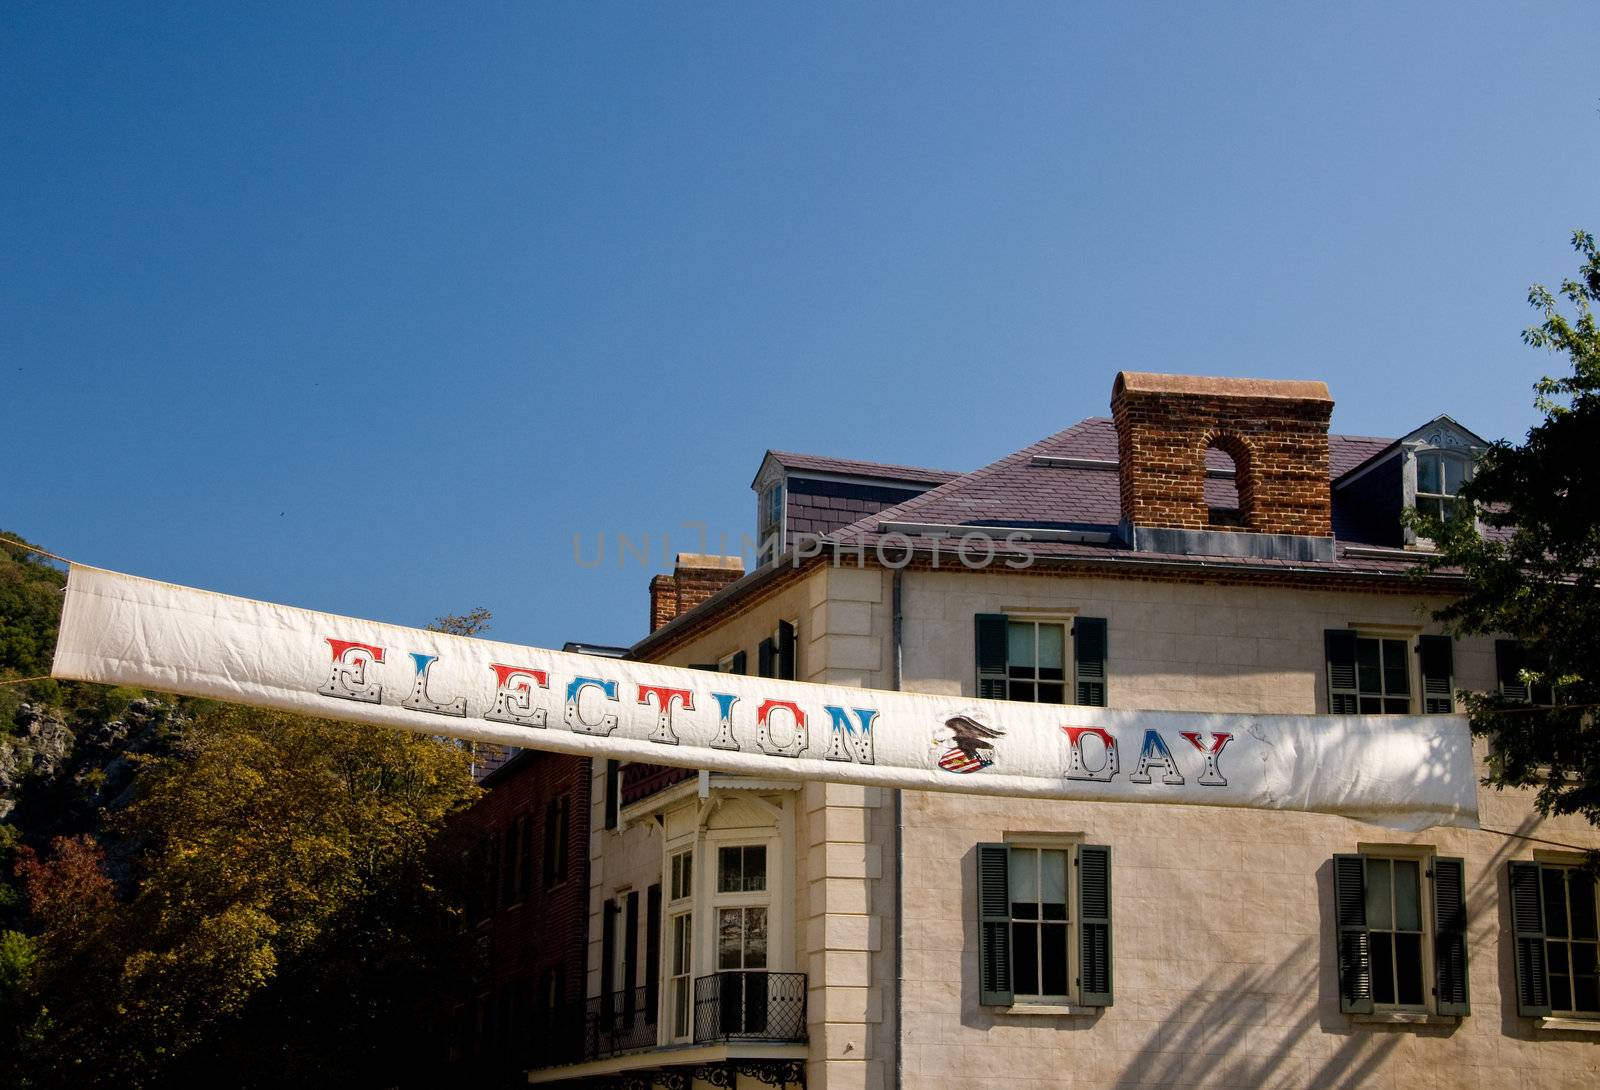 Vintage election day banner stretched across street